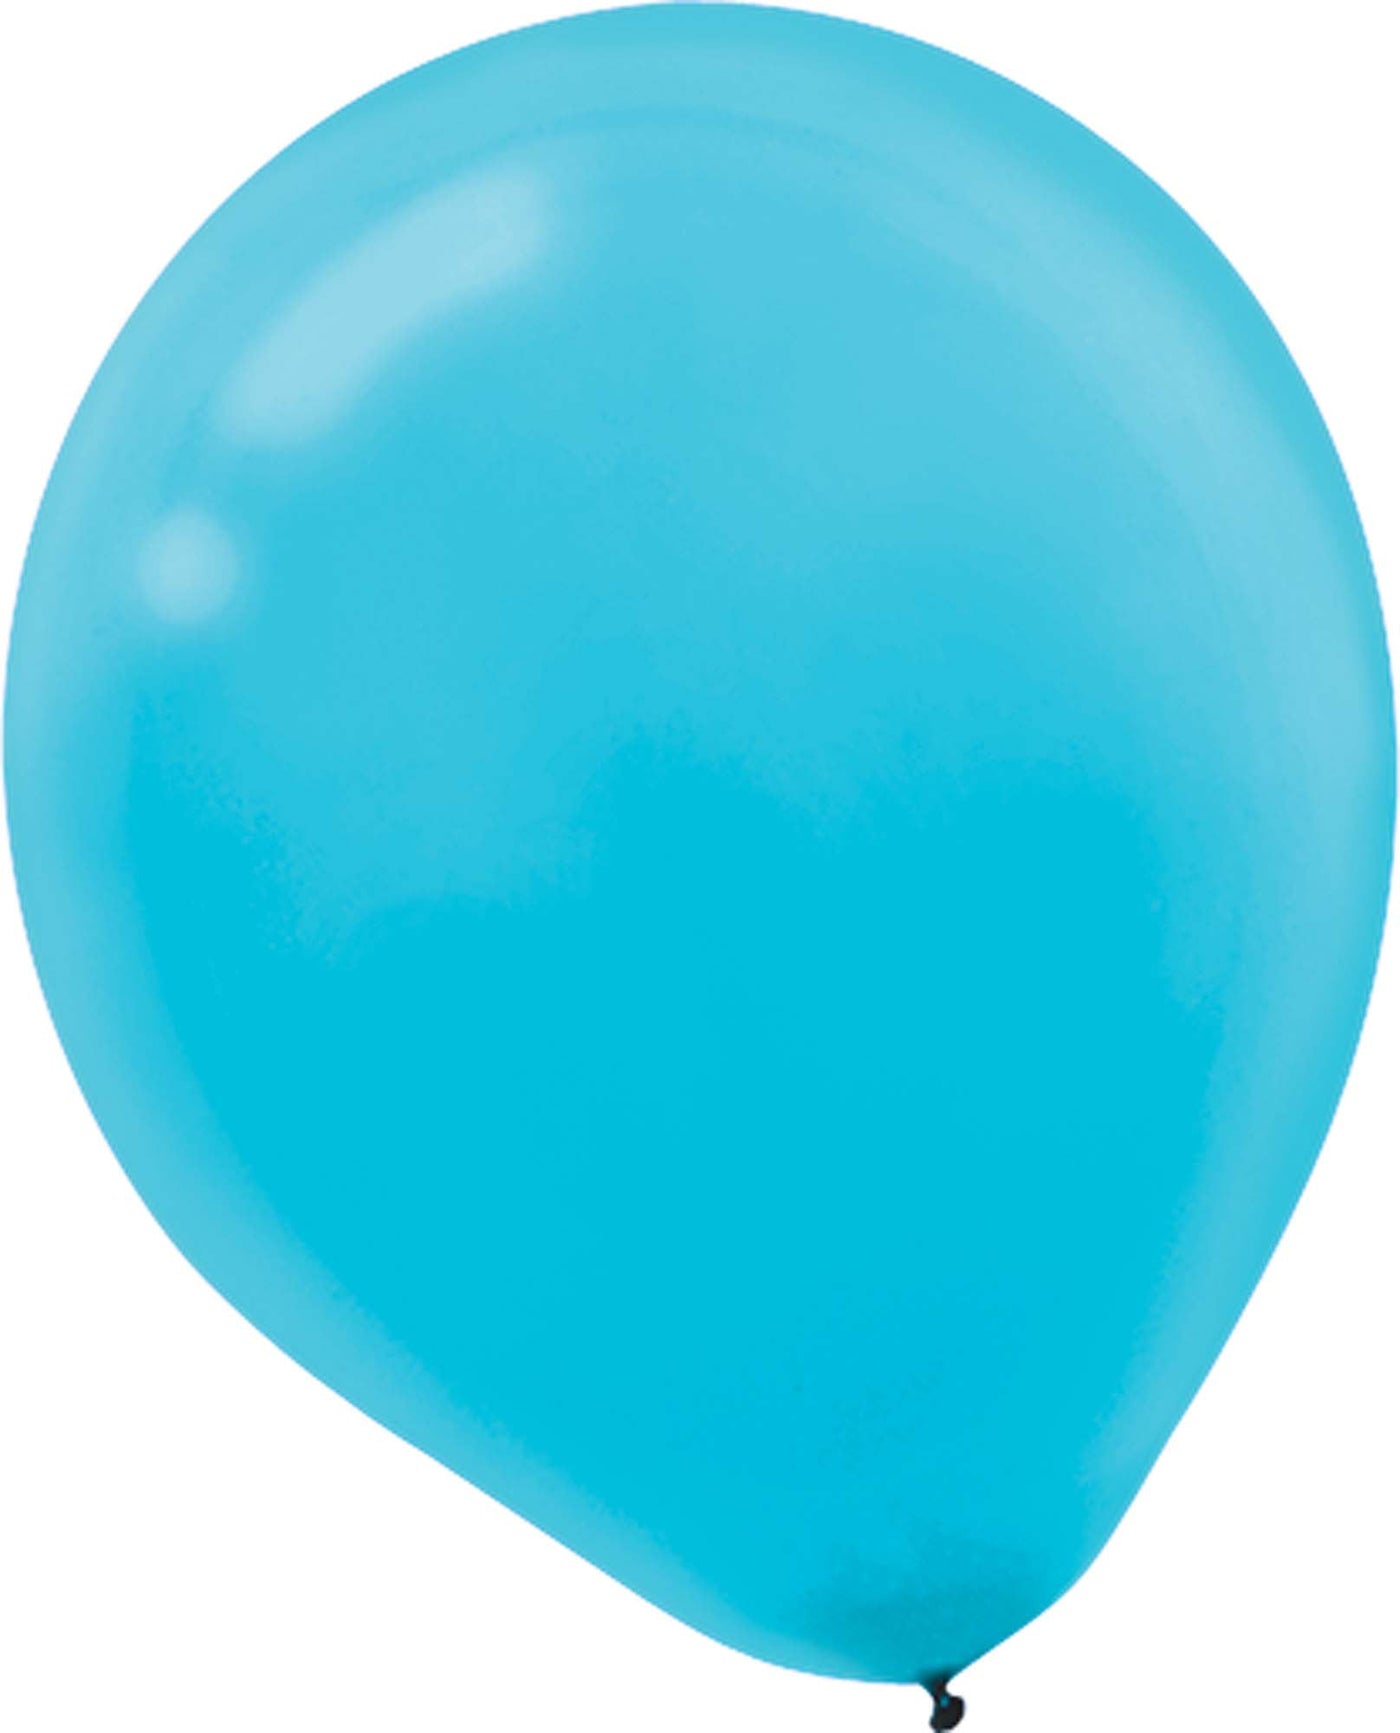 Caribbean Blue Latex 5'' Balloons 50ct - JJ's Party House